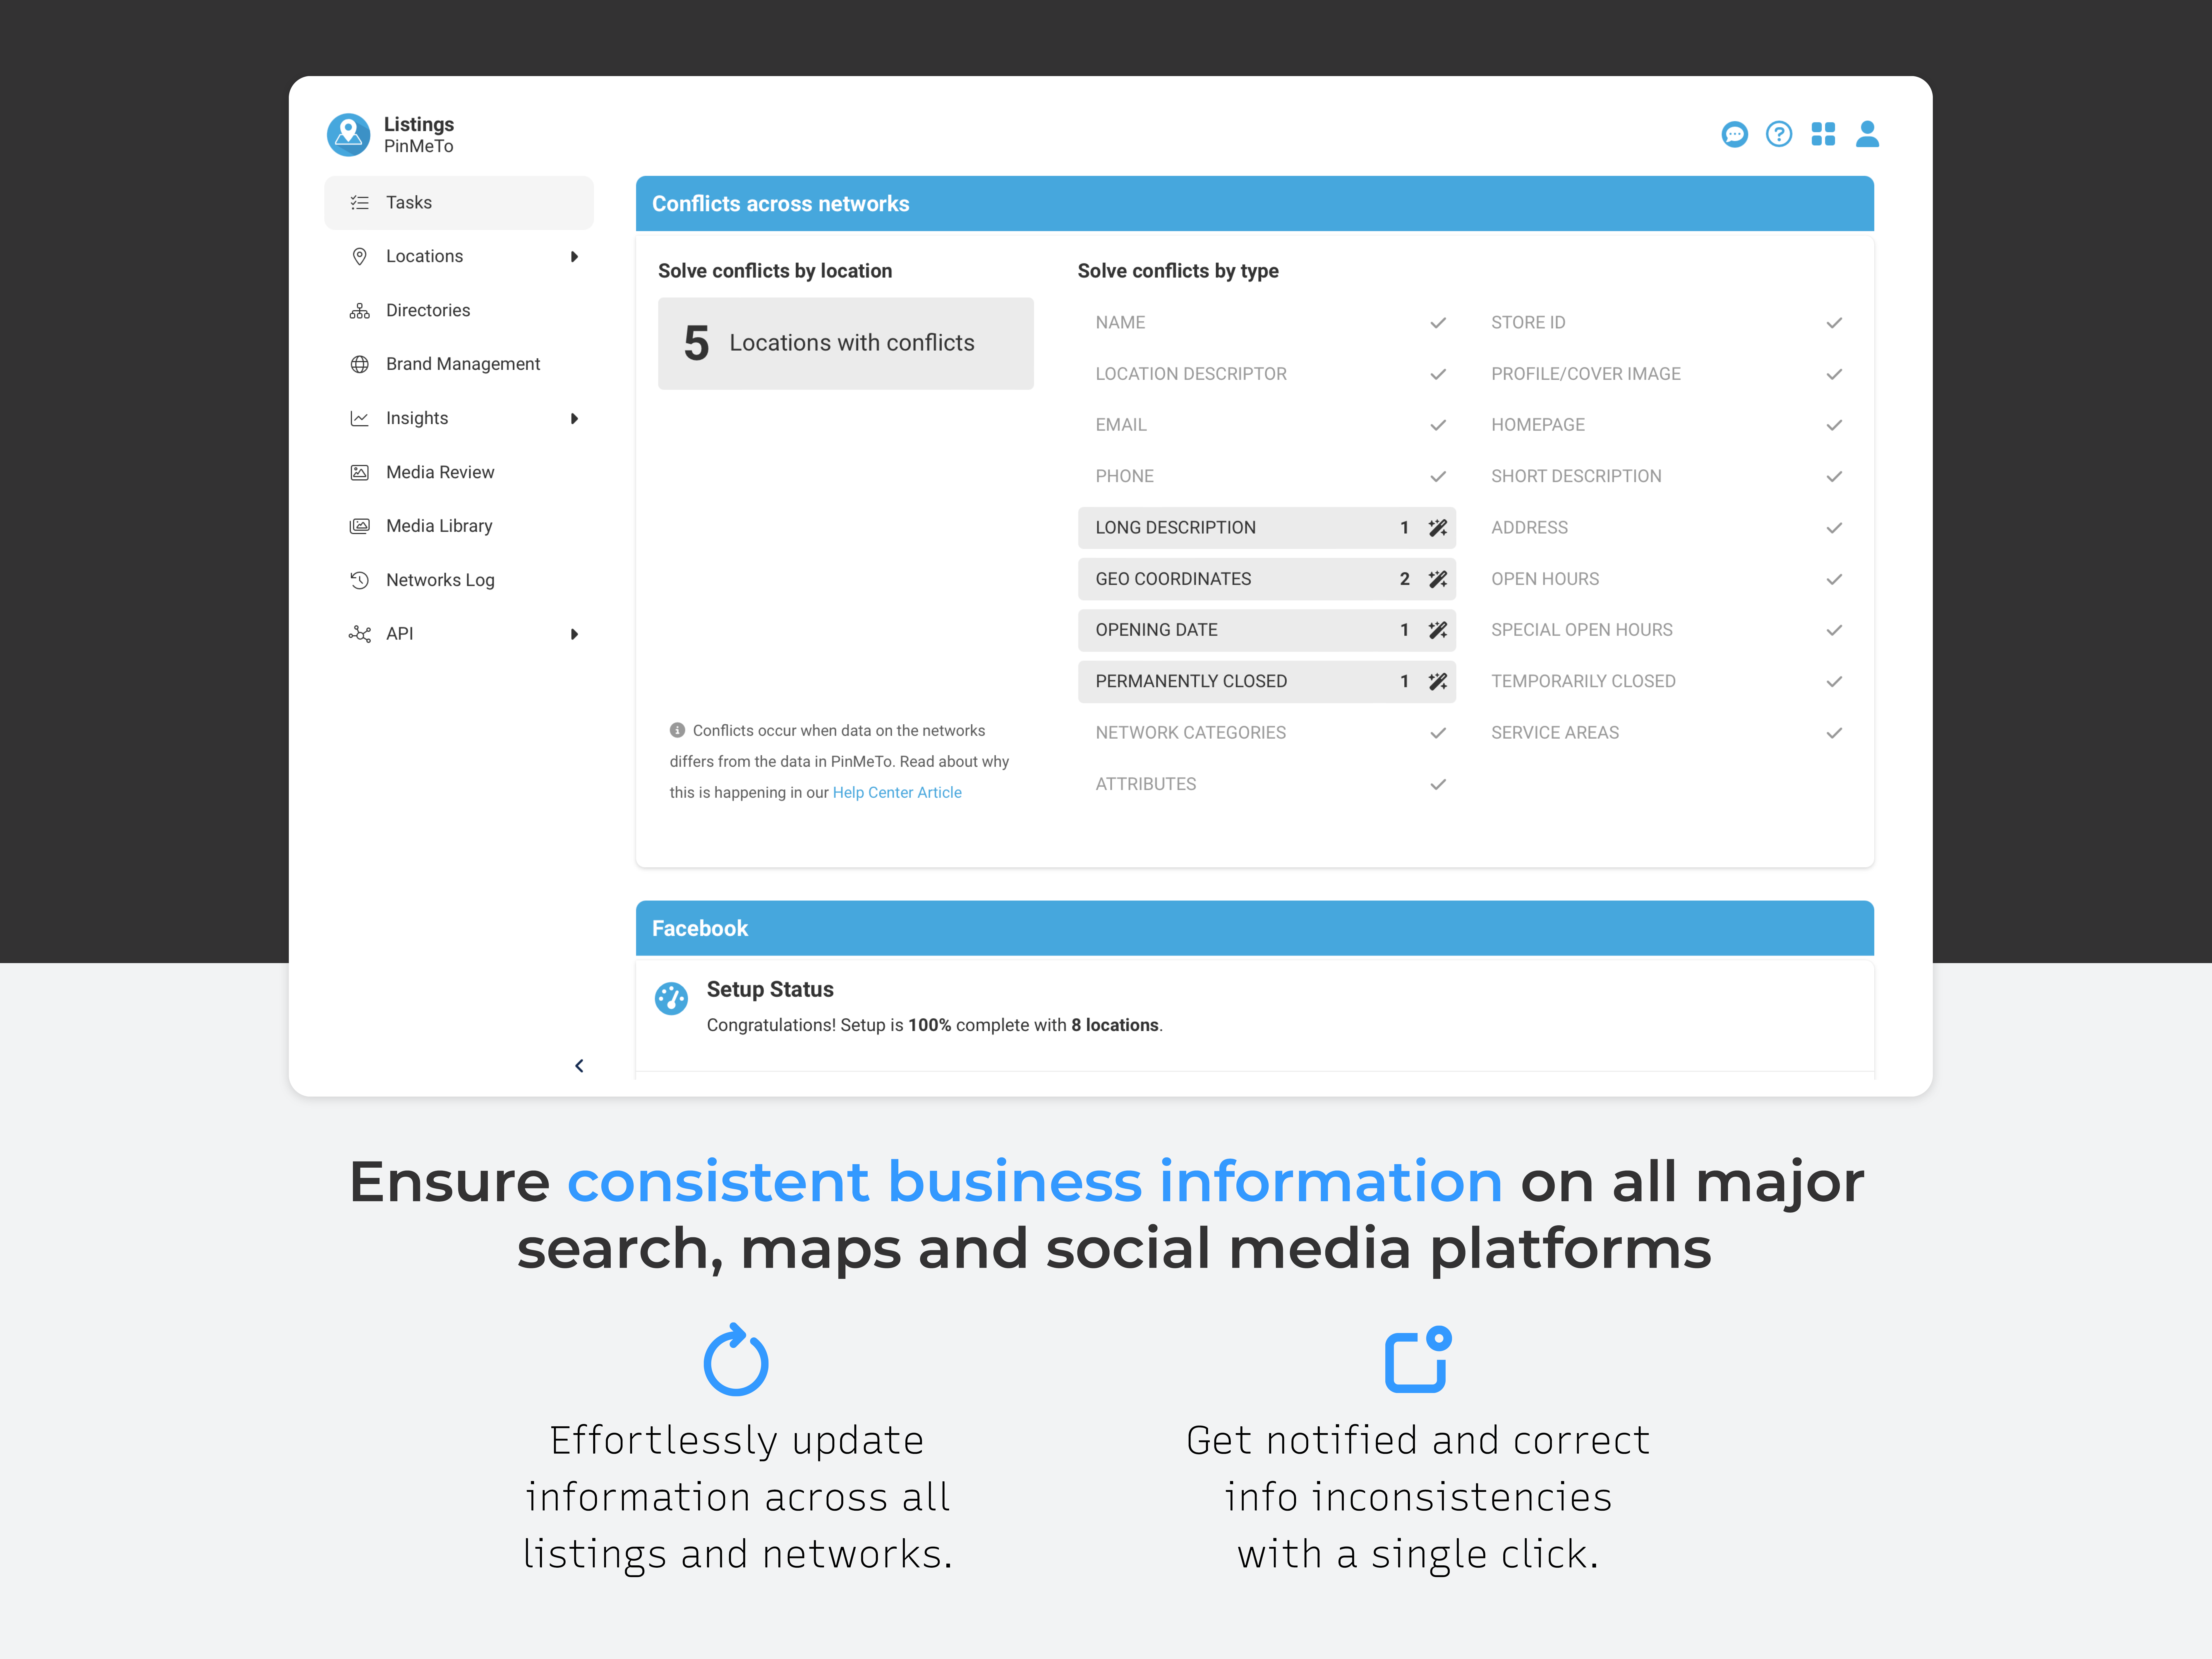 Manage your business information on all local listings with PinMeTo